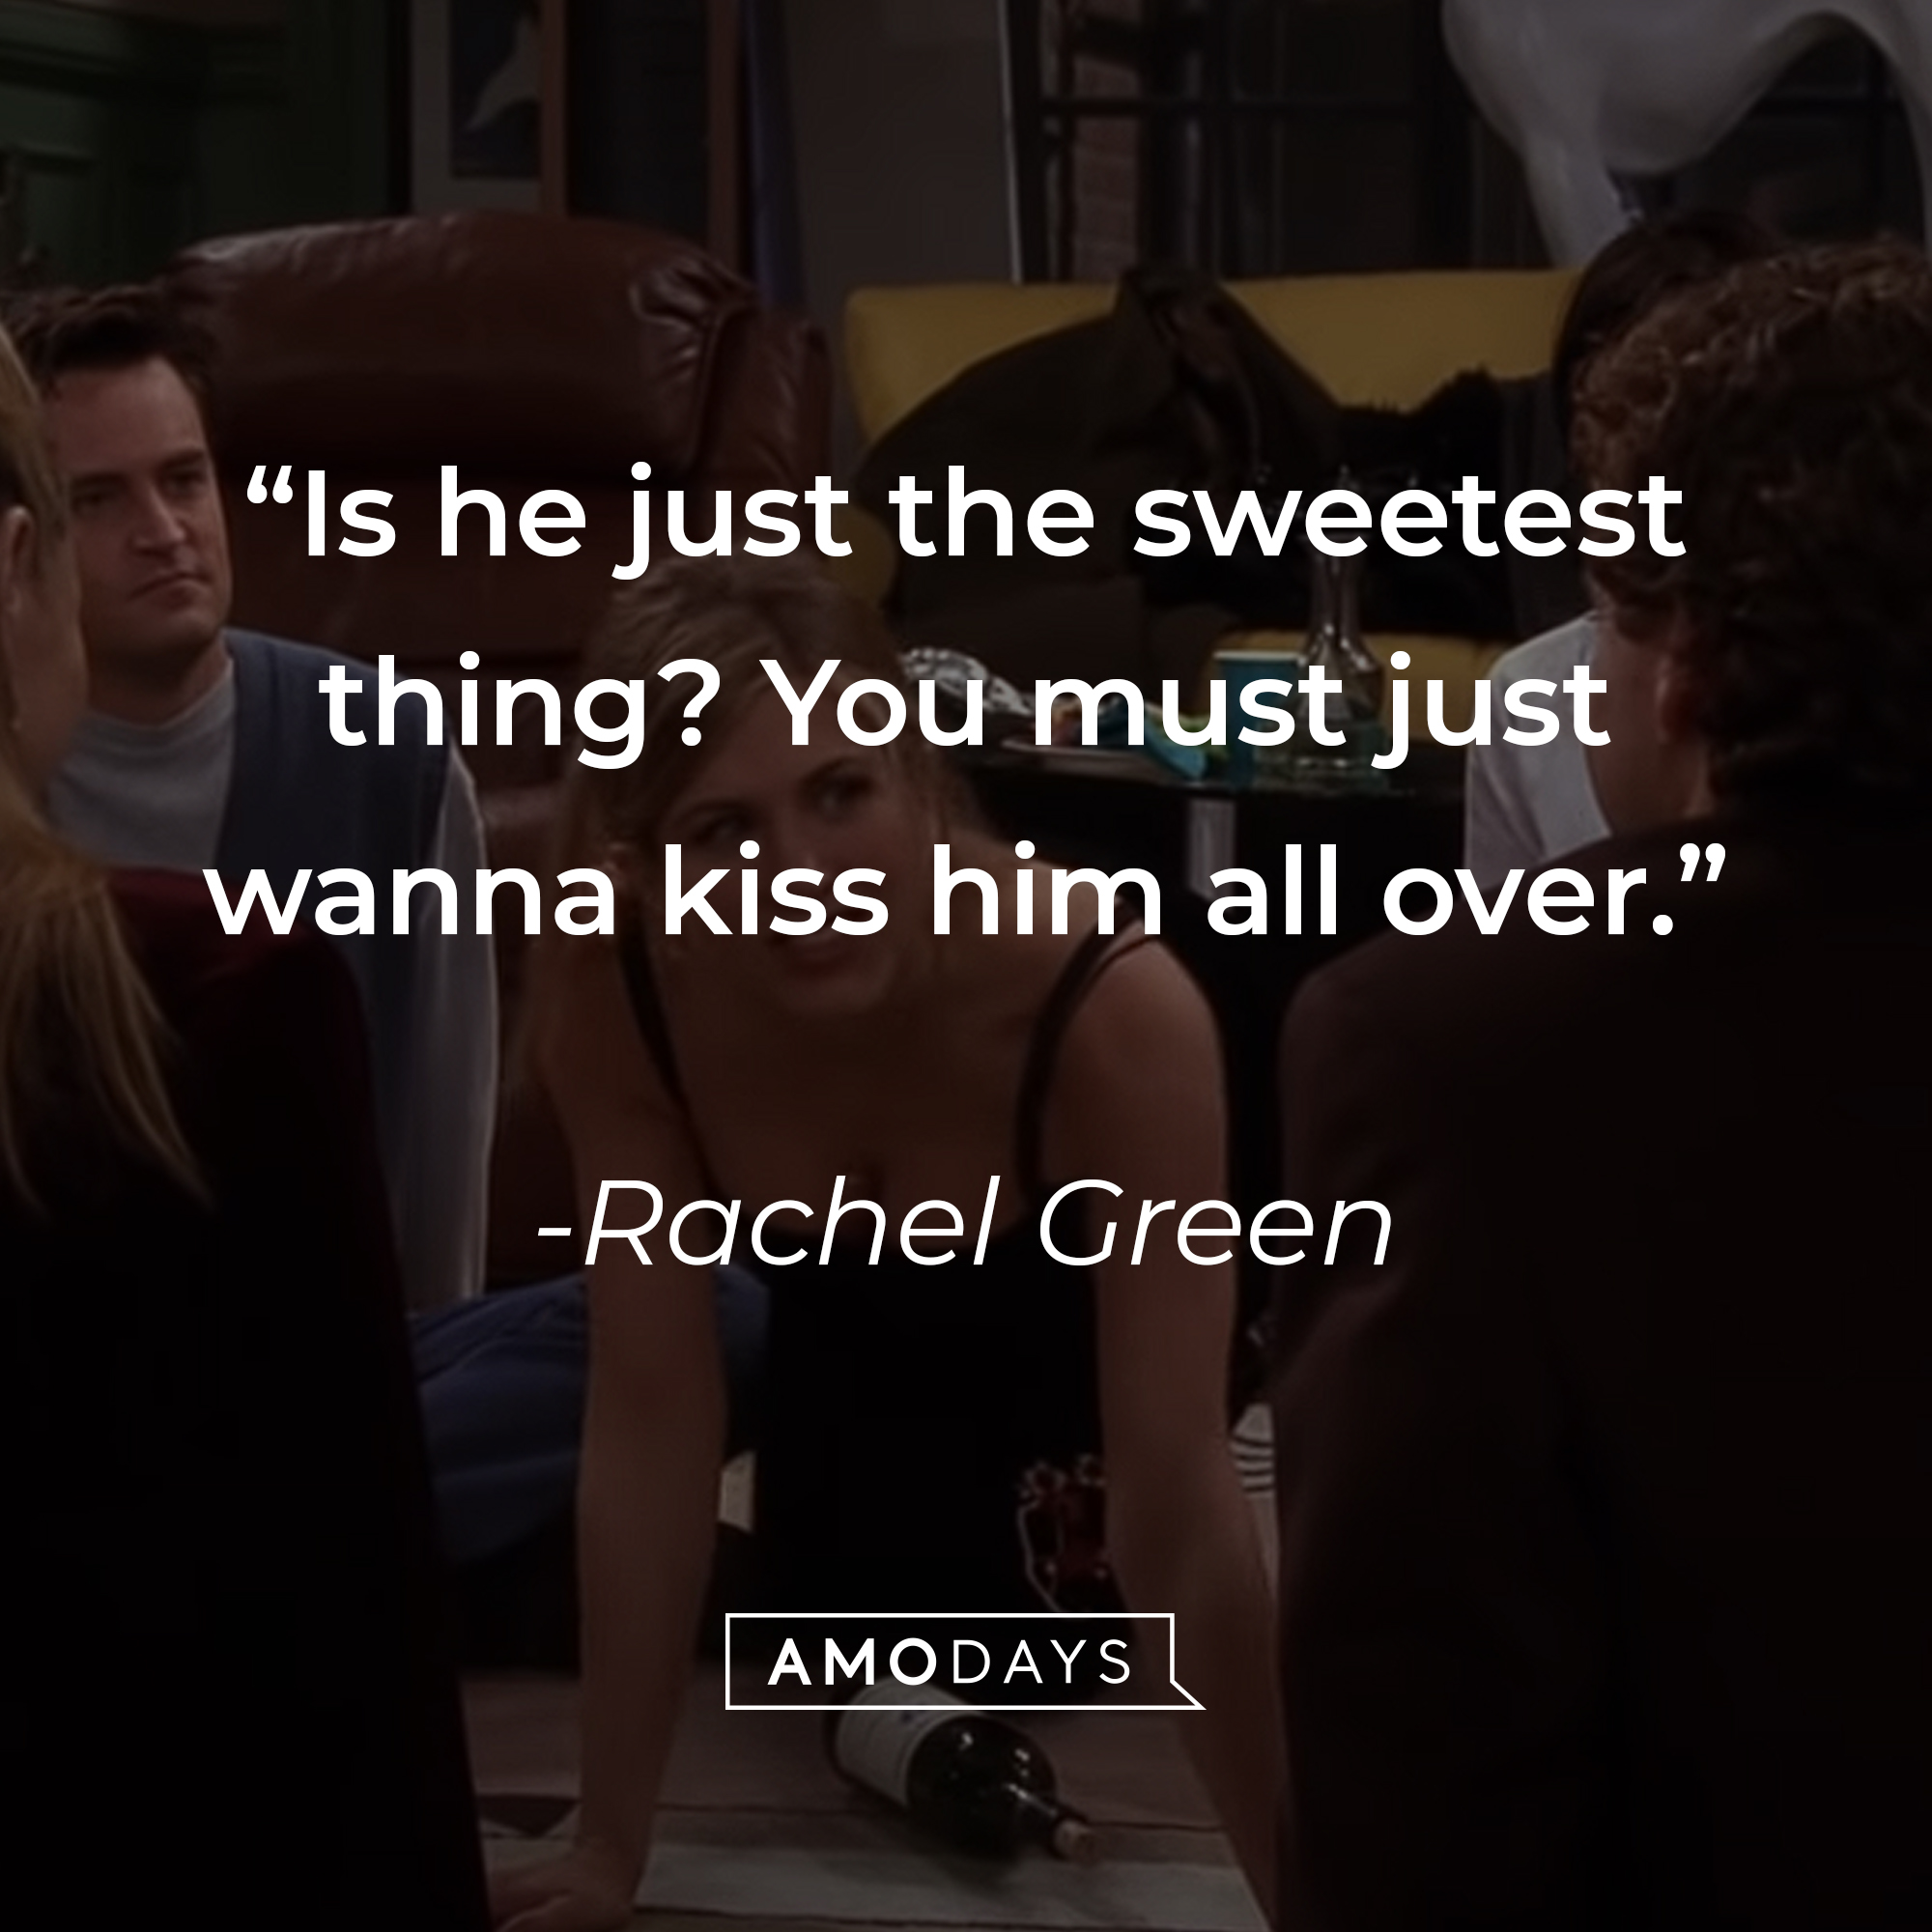 Rachel Green's quote: "Is he just the sweetest thing? You must just wanna kiss him all over." | Source: youtube.com/warnerbrostv